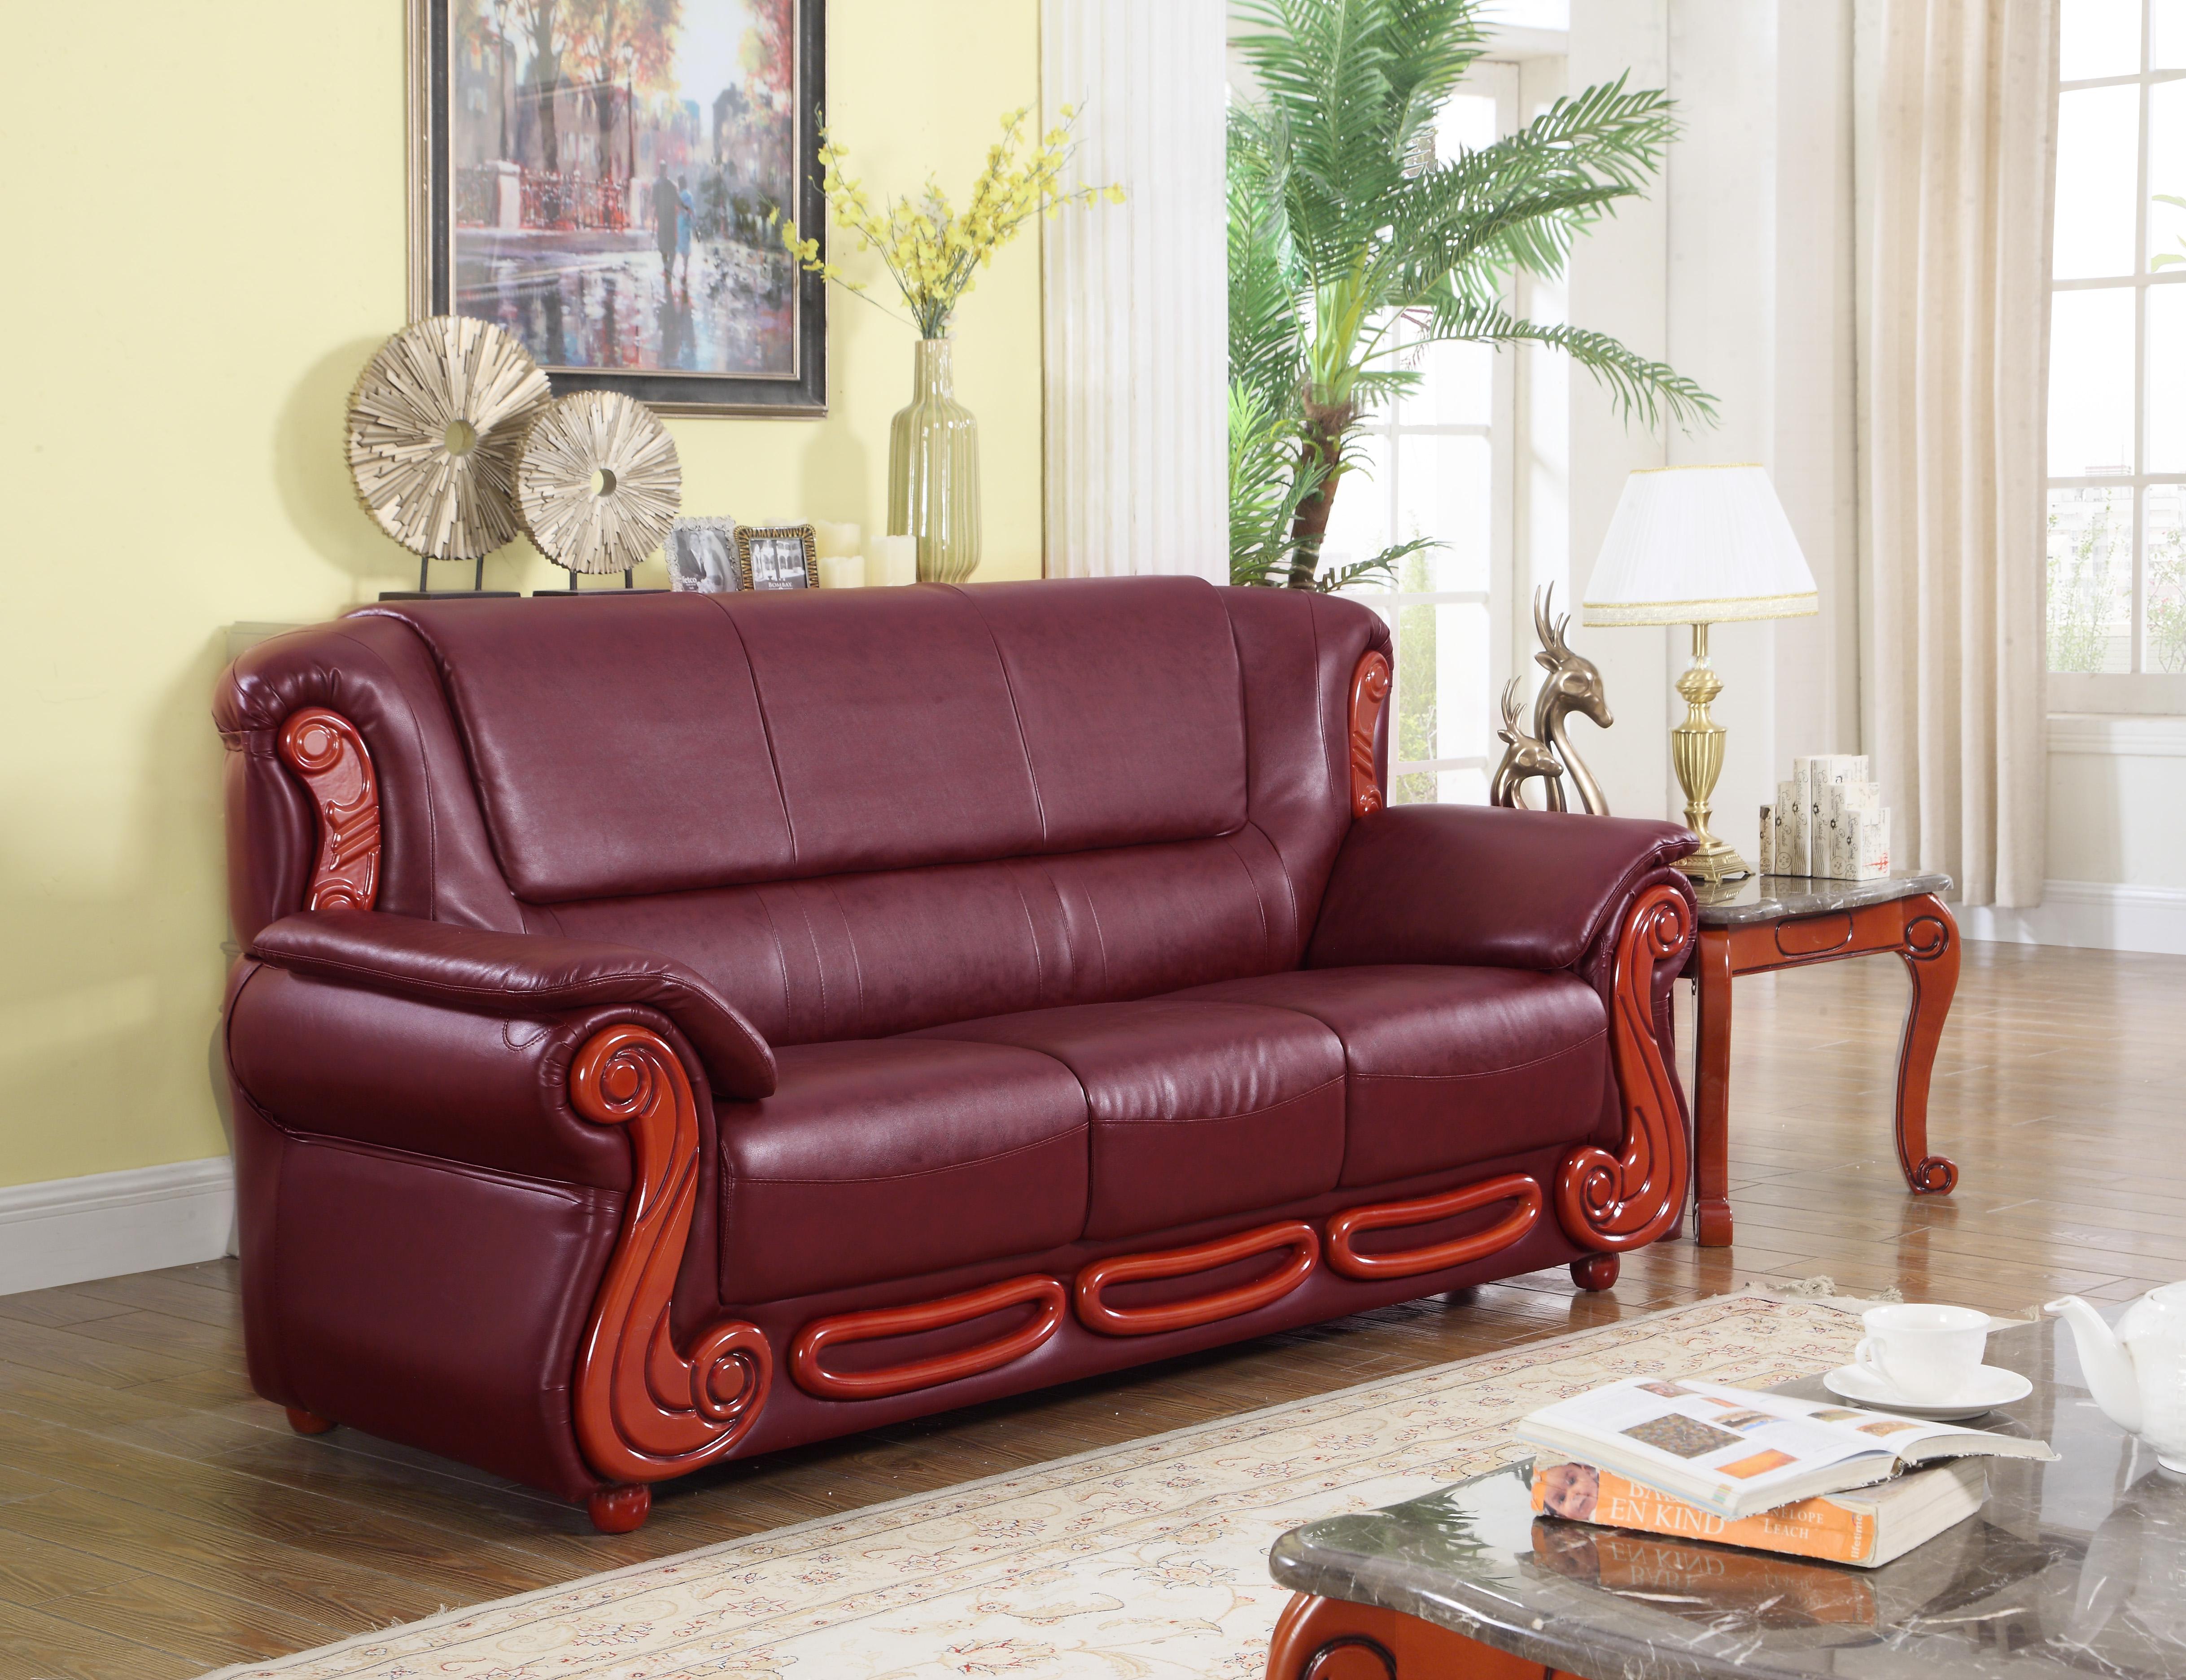 

    
Meridian 632 Bella Burgundy Bonded Leather Living Room Sofa Traditional Classic
